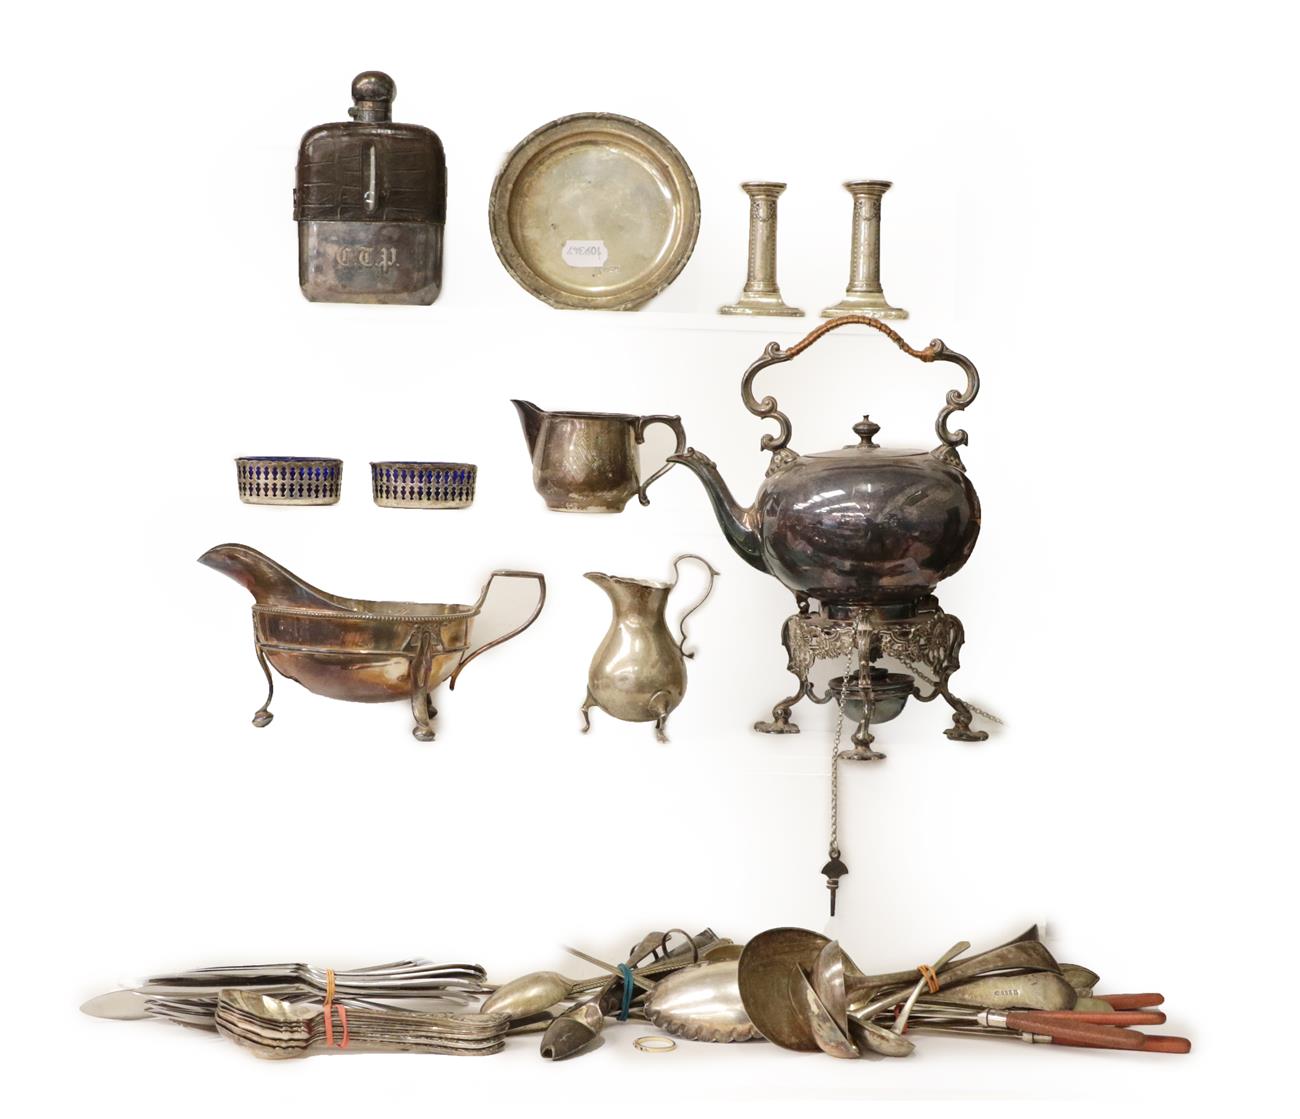 Lot 14 - A Collection of Assorted Silver and Silver Plate, the silver comprising: a helmet-shaped cream-jug